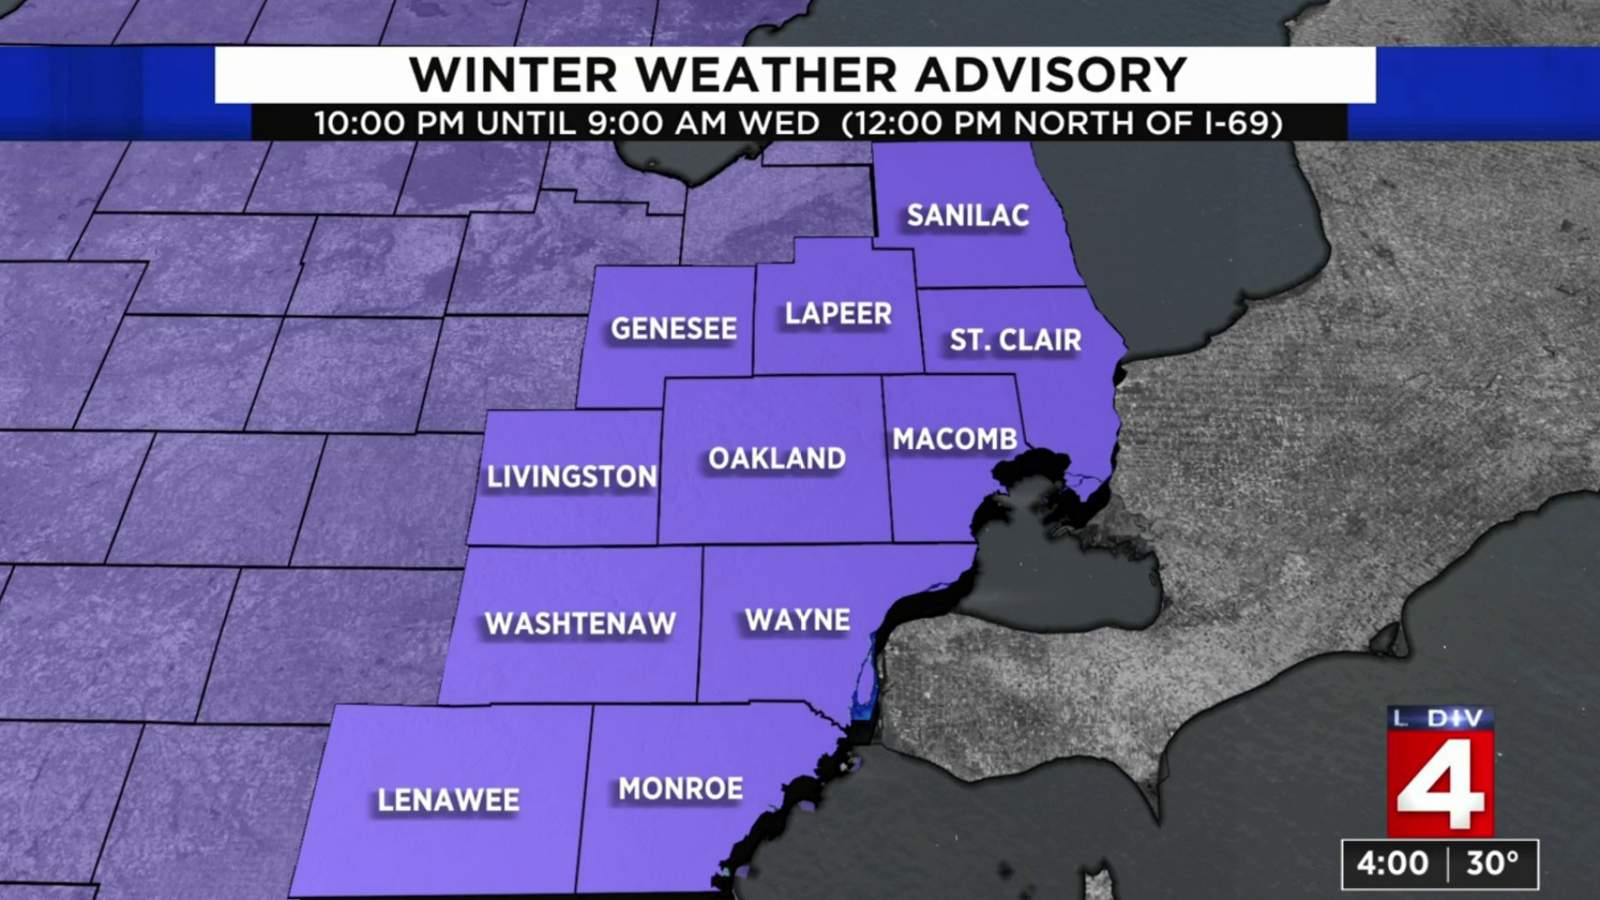 Winter weather advisory issued for SE Michigan with snow, icy roads on the way